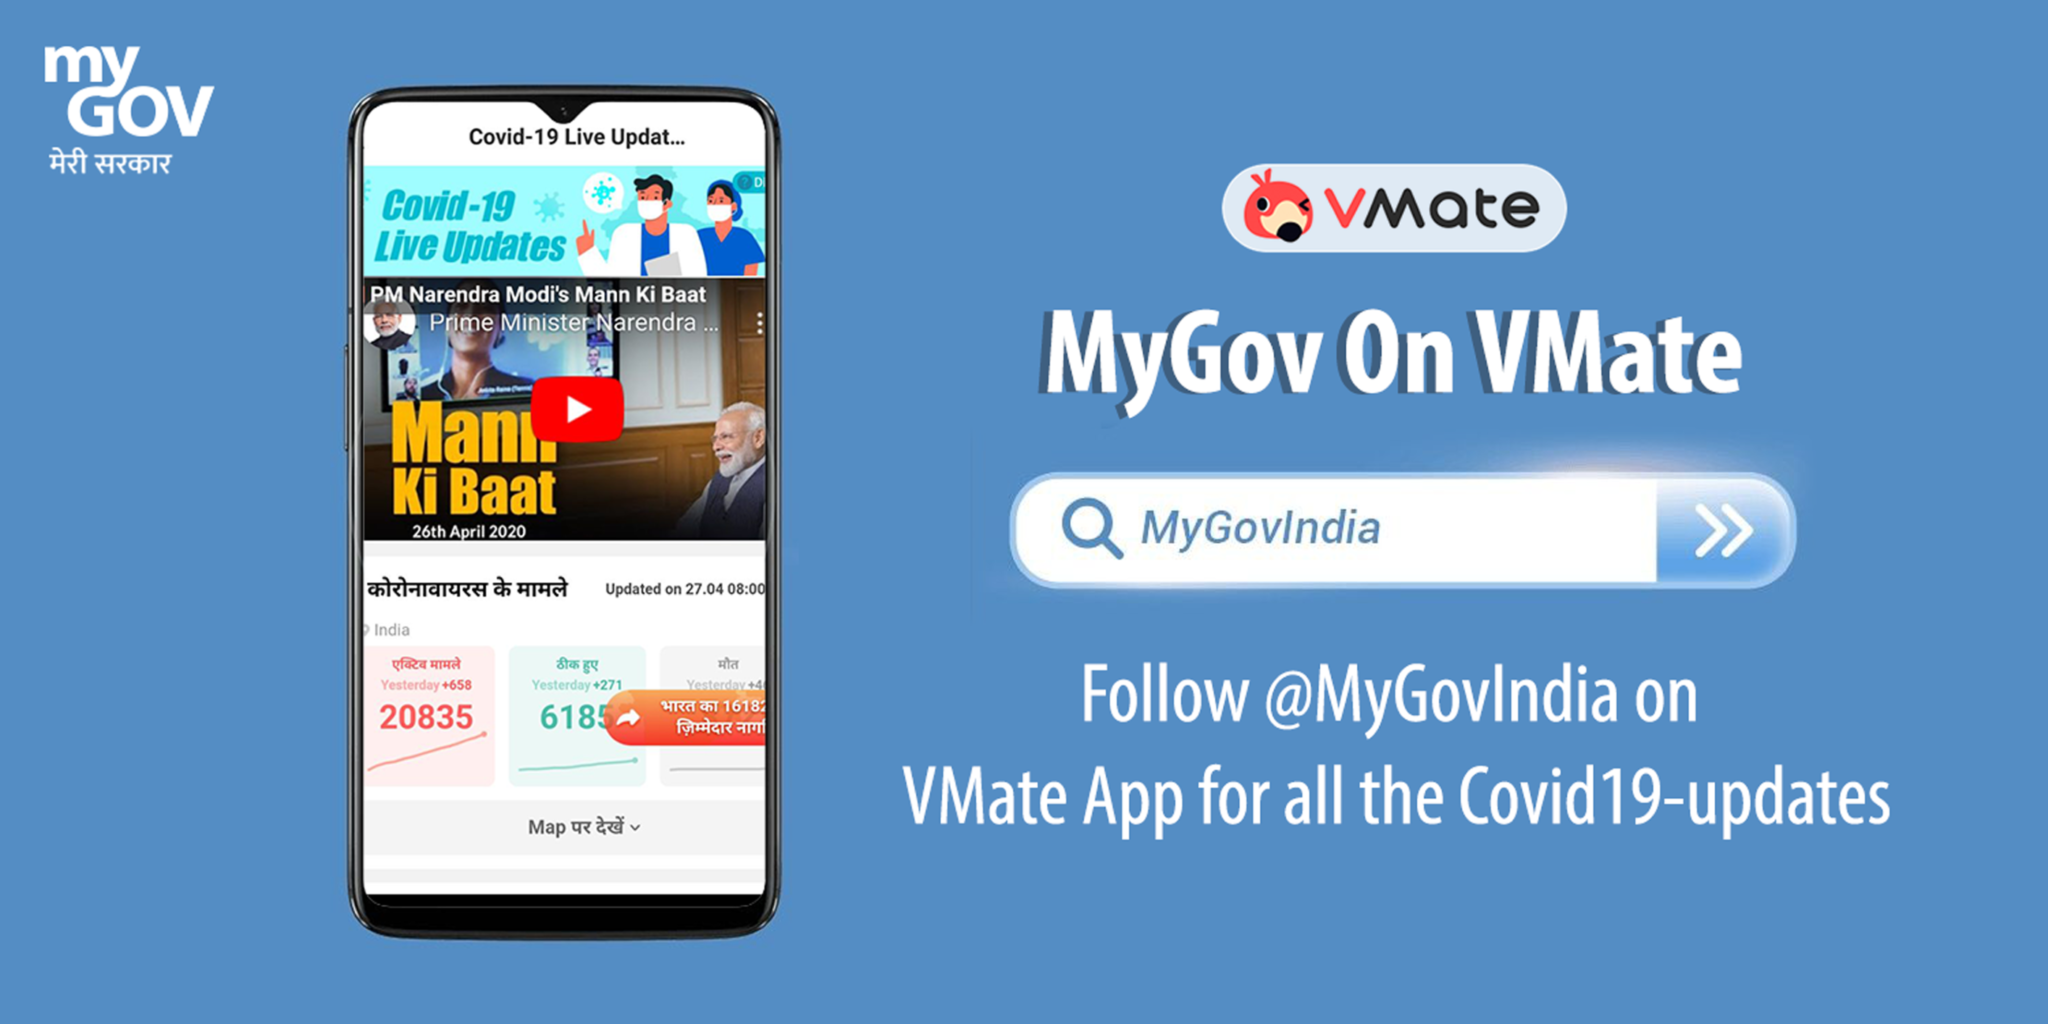 vmate-joins-hands-with-governments-mygov-initiative-to-empower-citizens-in-fight-against-covid-19